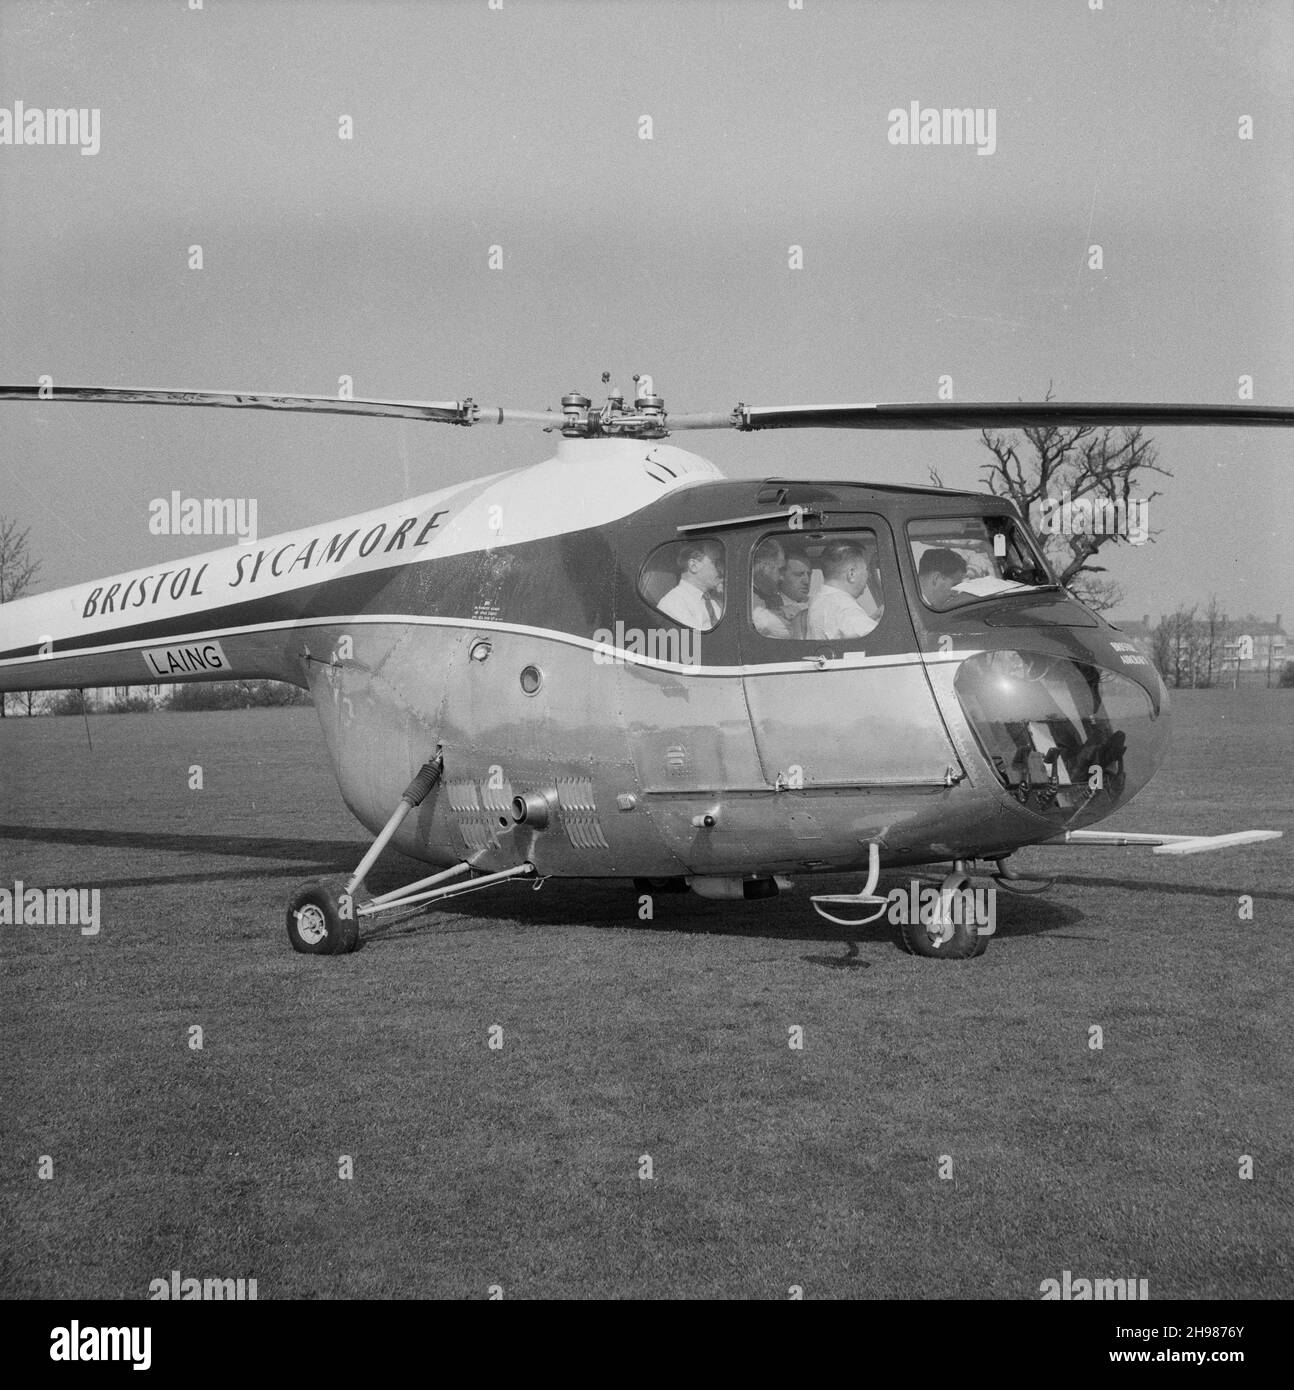 John Laing and Son Limited, Page Street, Mill Hill, Barnet, London, 30/04/1958. J M Laing with a party of men on board Laing's Bristol Sycamore helicopter. Laing's helicopter was used to photograph and inspect progress on their construction sites such as the London to Yorkshire Motorway (M1 Motorway). Stock Photo